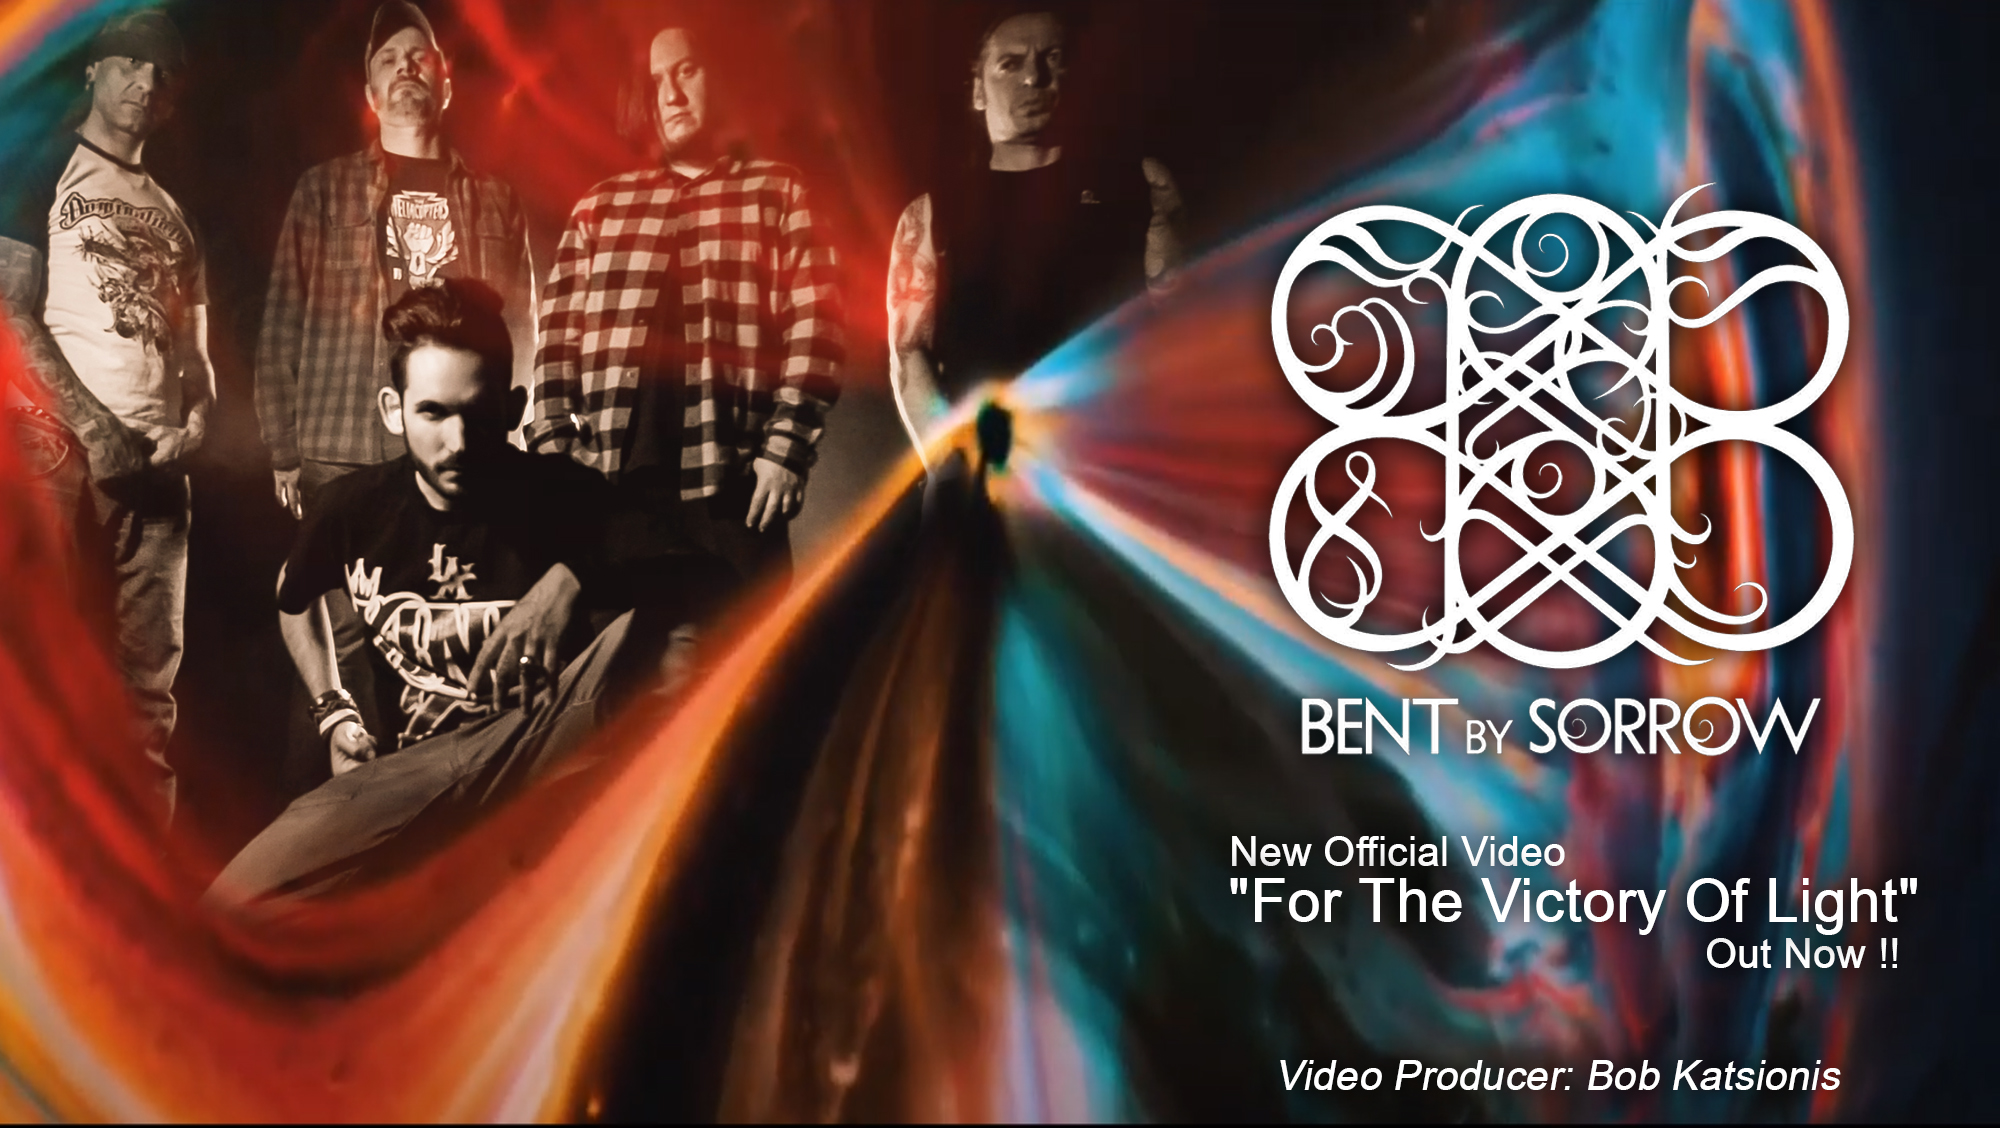 You are currently viewing BENT BY SORROW: Επίσημο βίντεο για το νέο single «For The Victory Of Light».